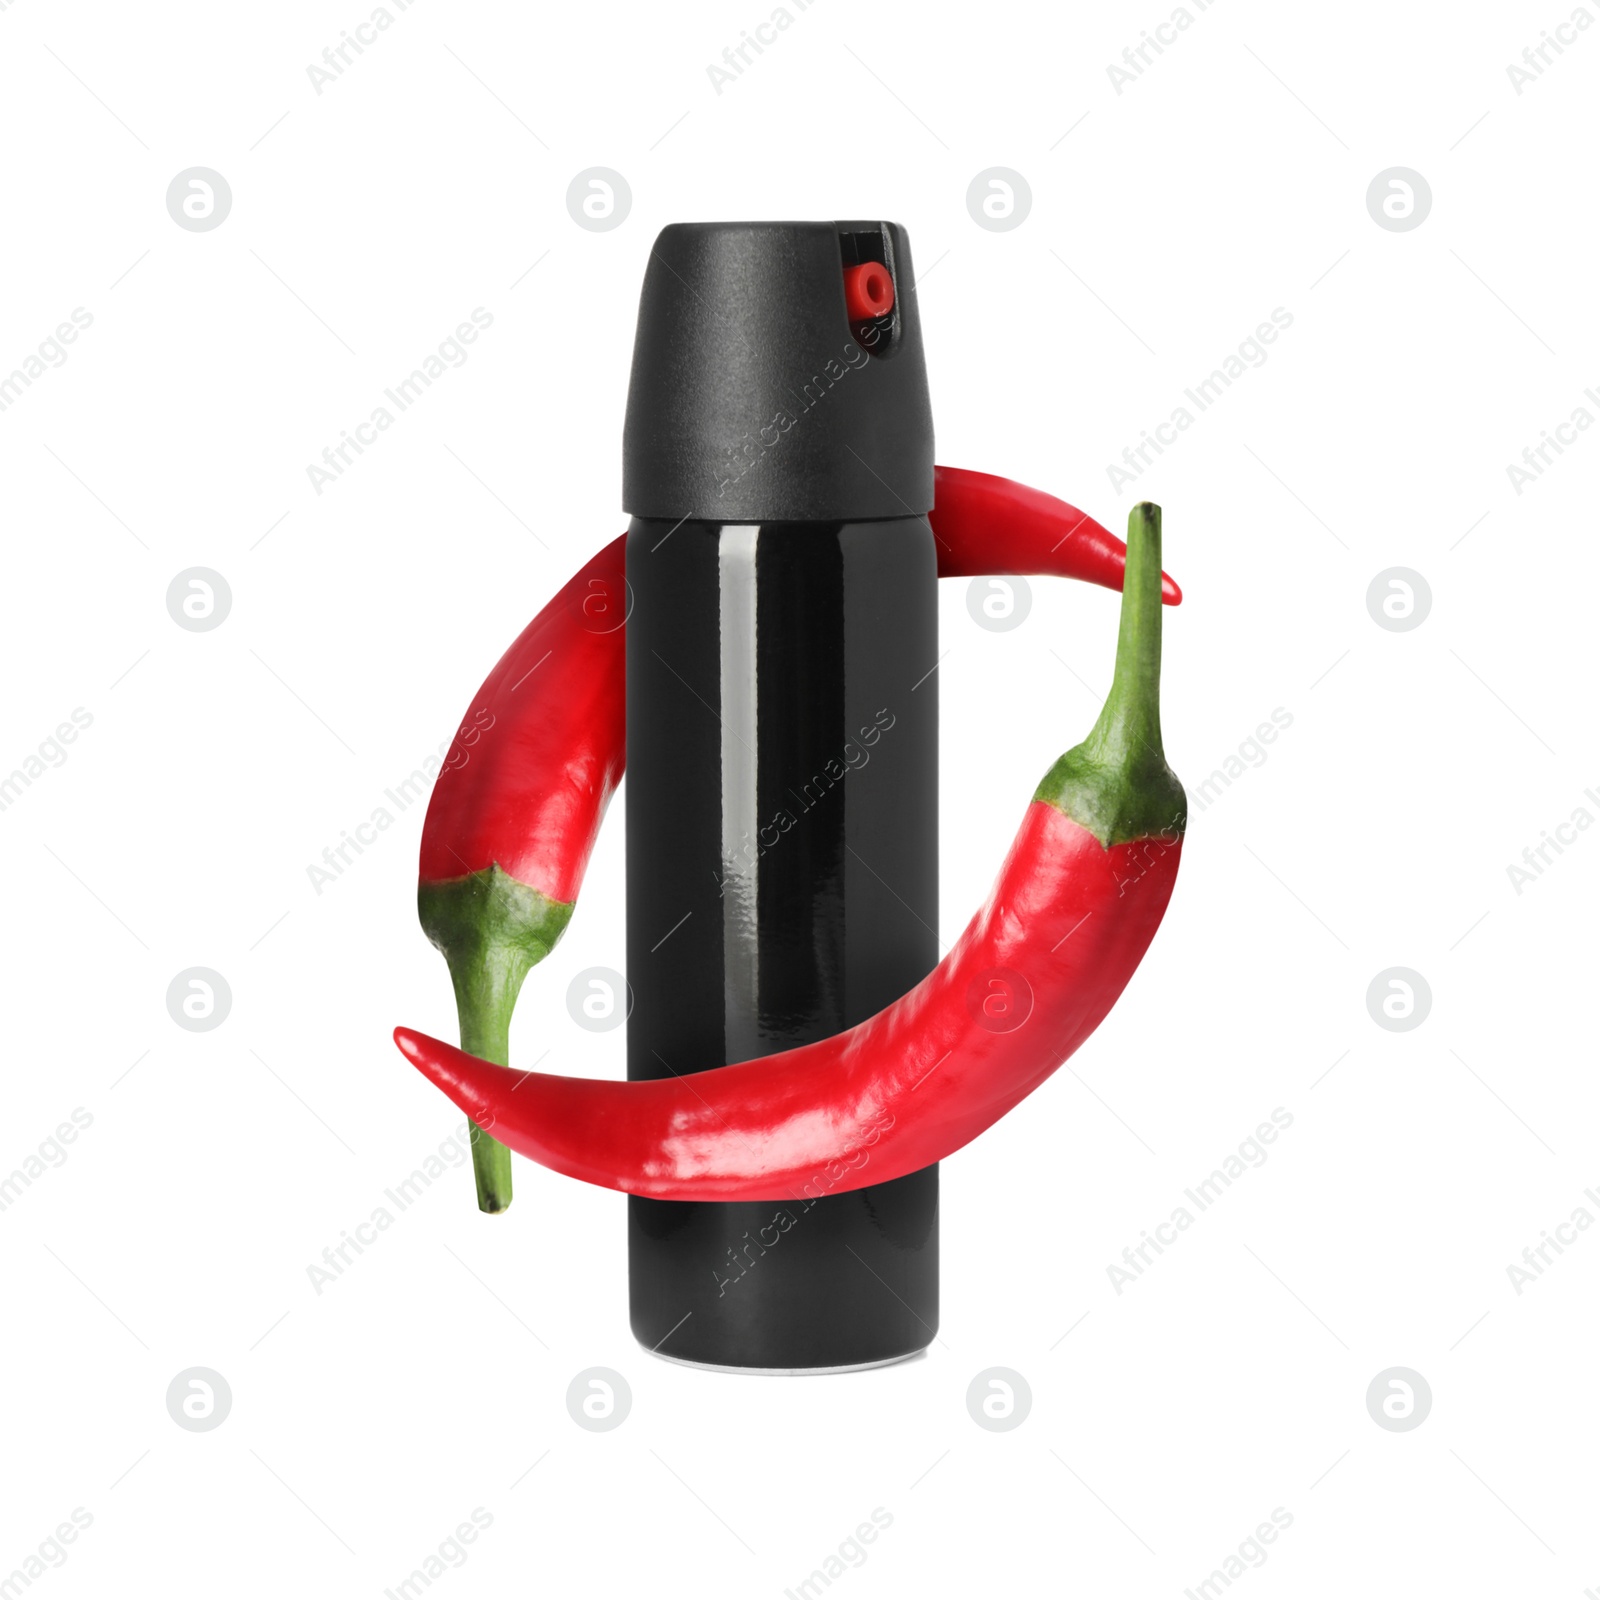 Image of Bottle of pepper spray and red hot chilies on white background